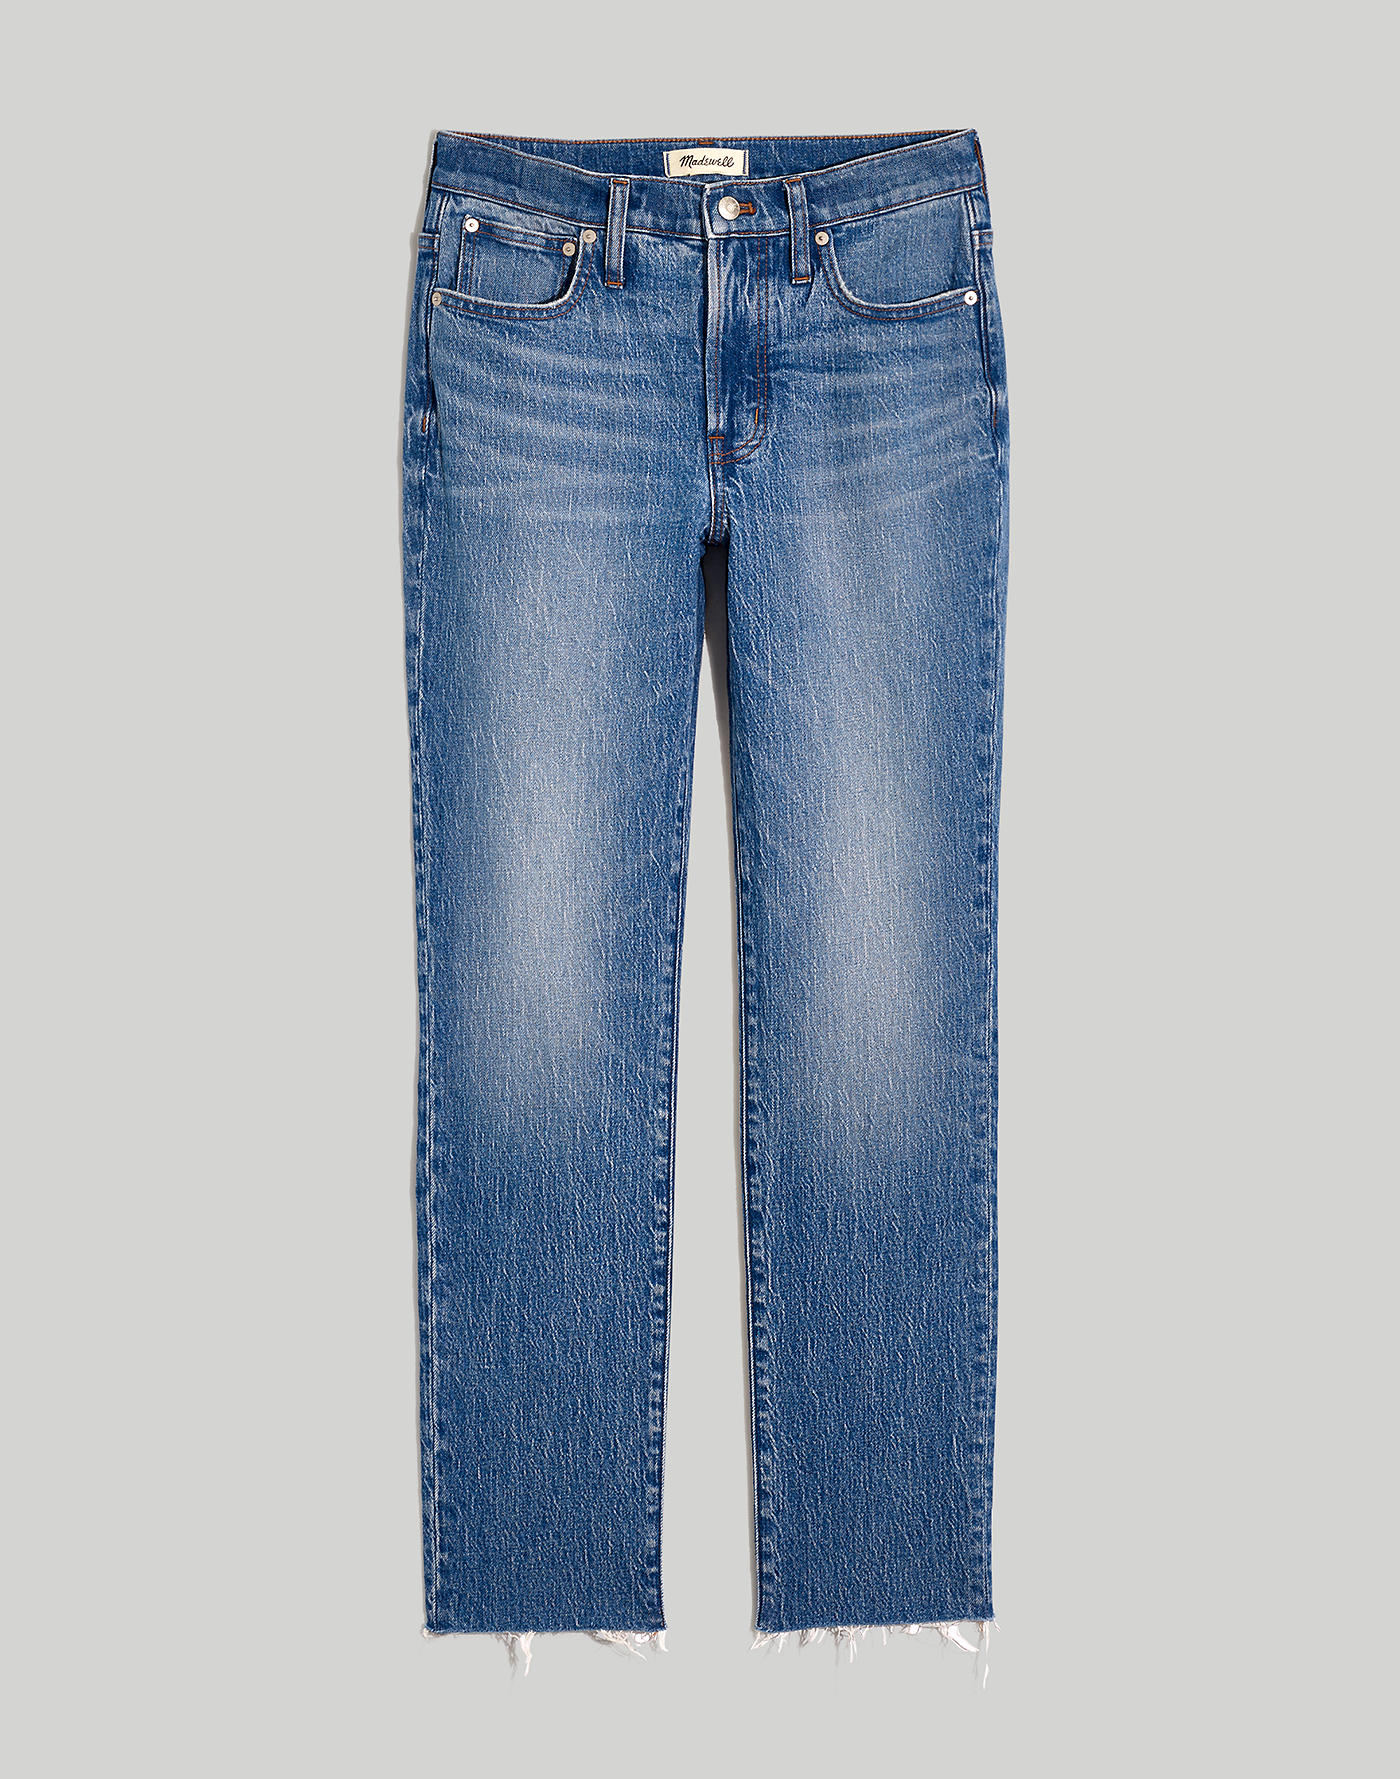 Madewell The Mid-Rise Perfect Vintage Jean in Enmore Wash